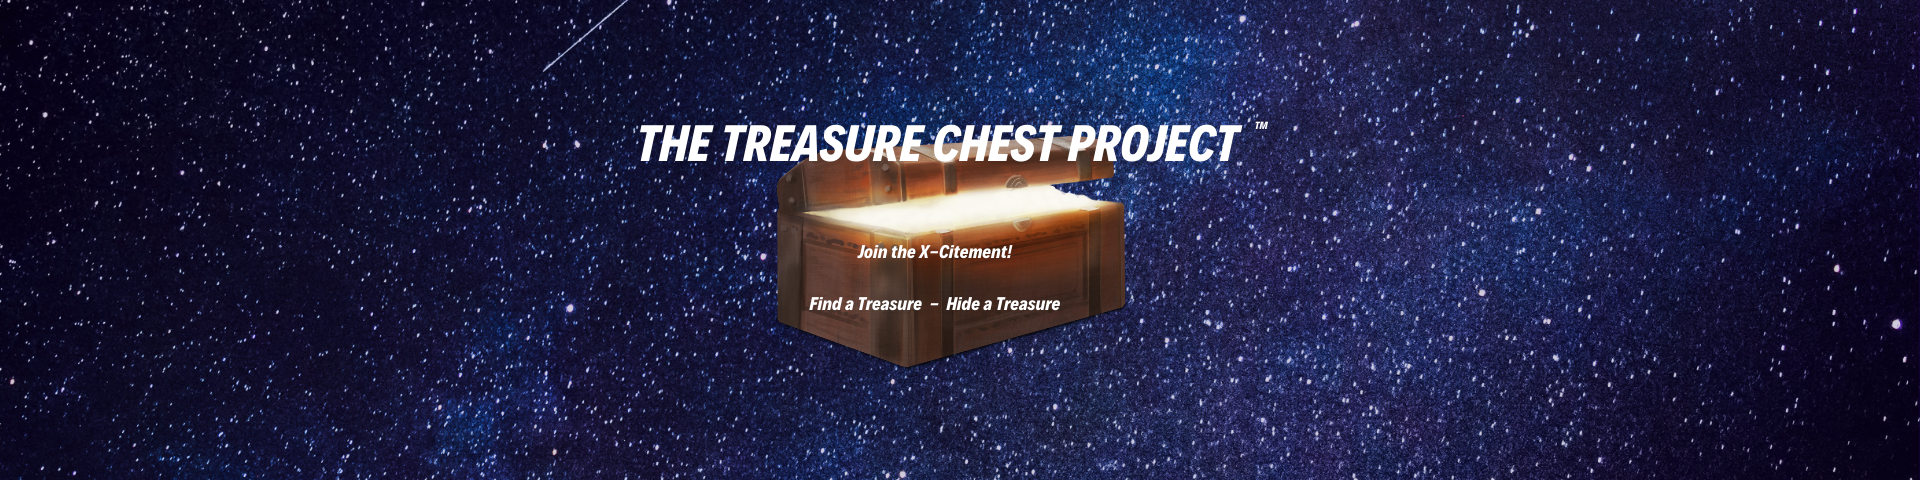 Quotes for The Treasure Chest Project’s Treasure Chests